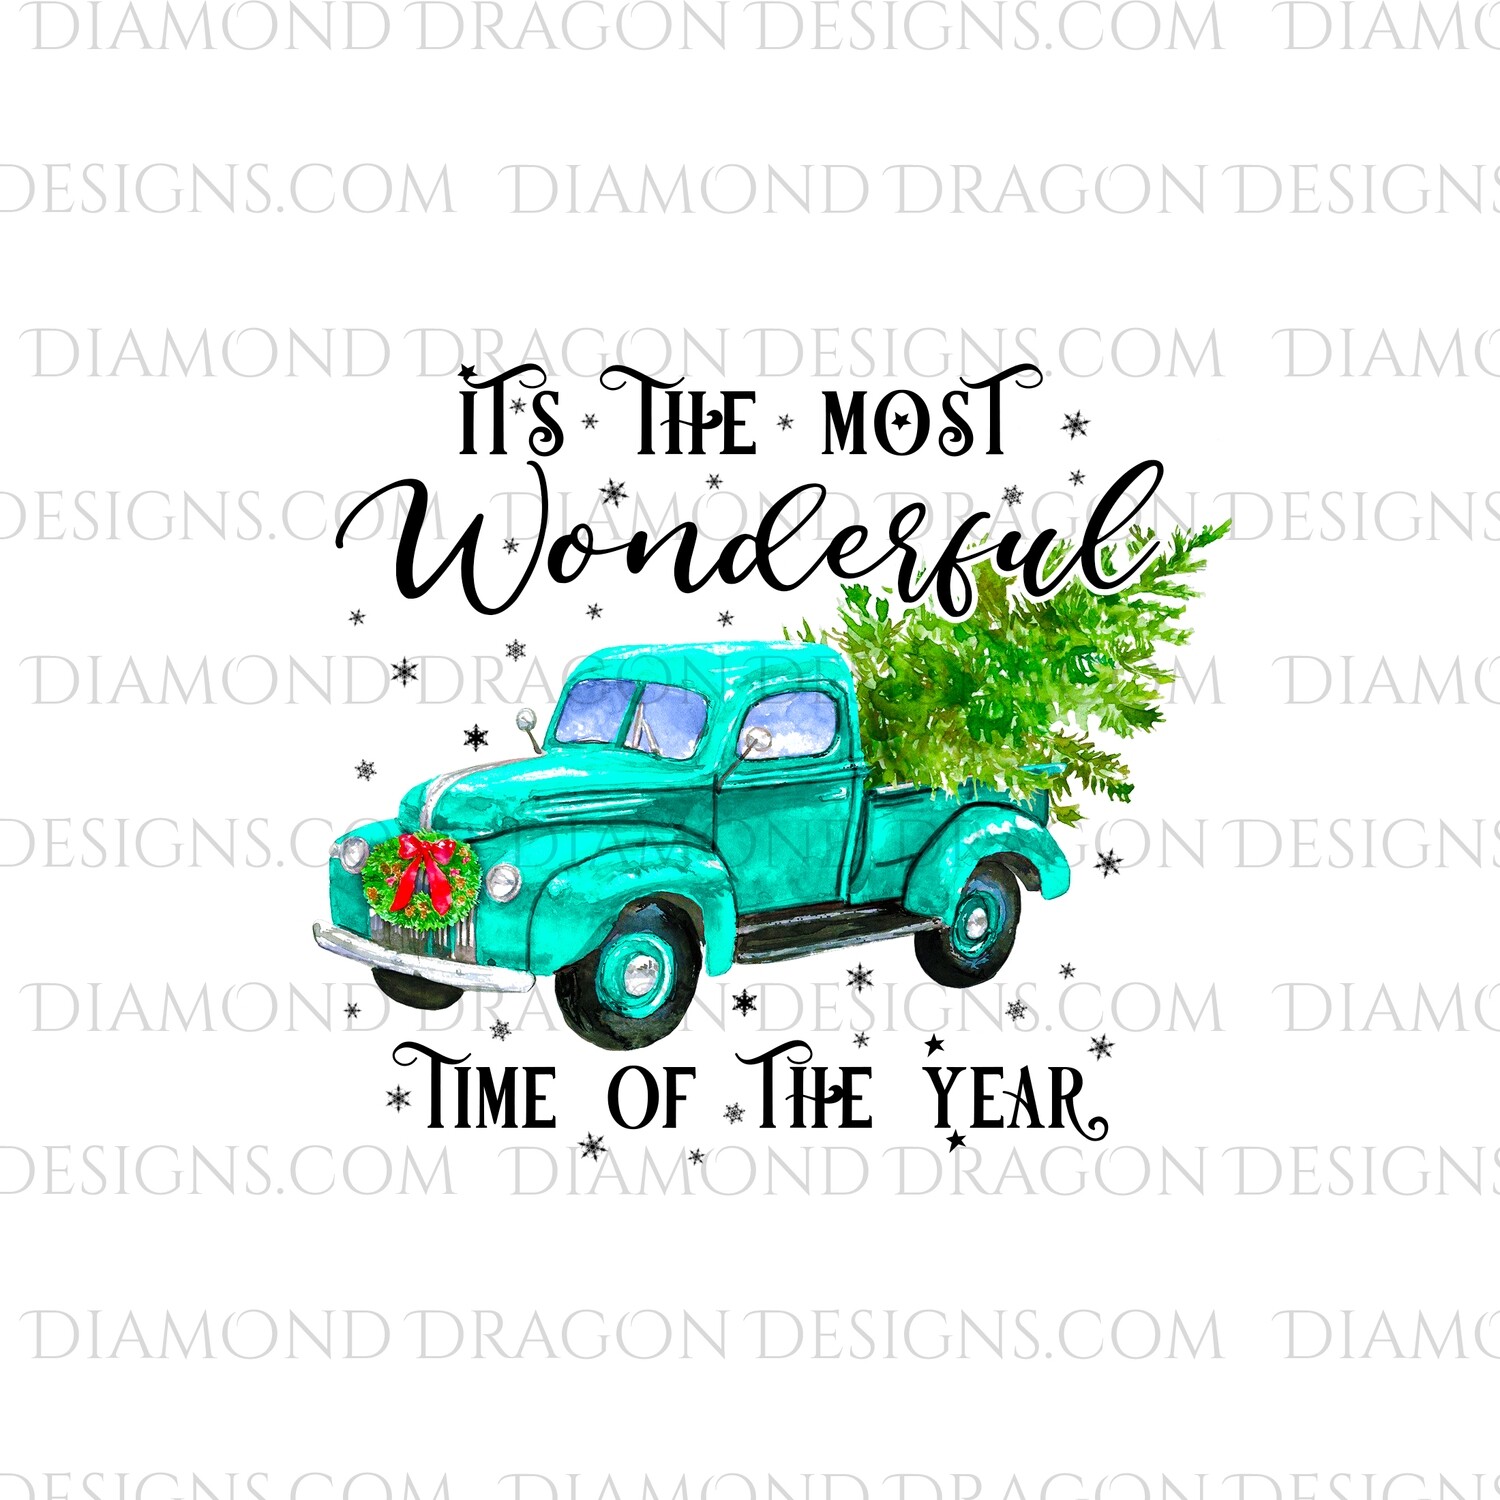 Christmas - Blue Truck, Christmas Tree, It’s the most wonderful time, Blue Vintage Truck, Digital Image